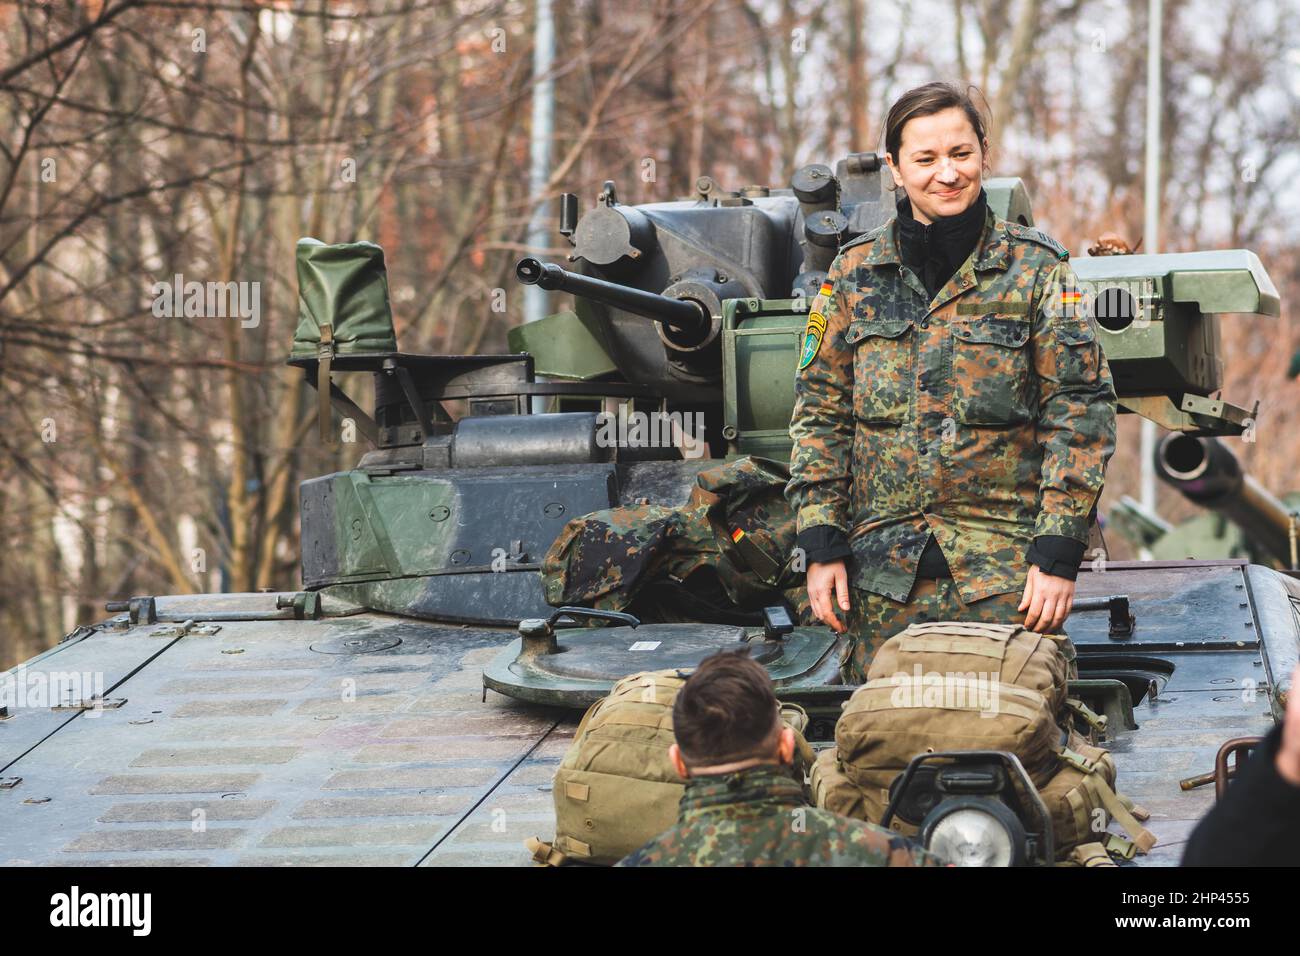 Armored crawler tank with cannon and female soldier smiling. German Army, member of NATO or North Atlantic Treaty Organization Stock Photo